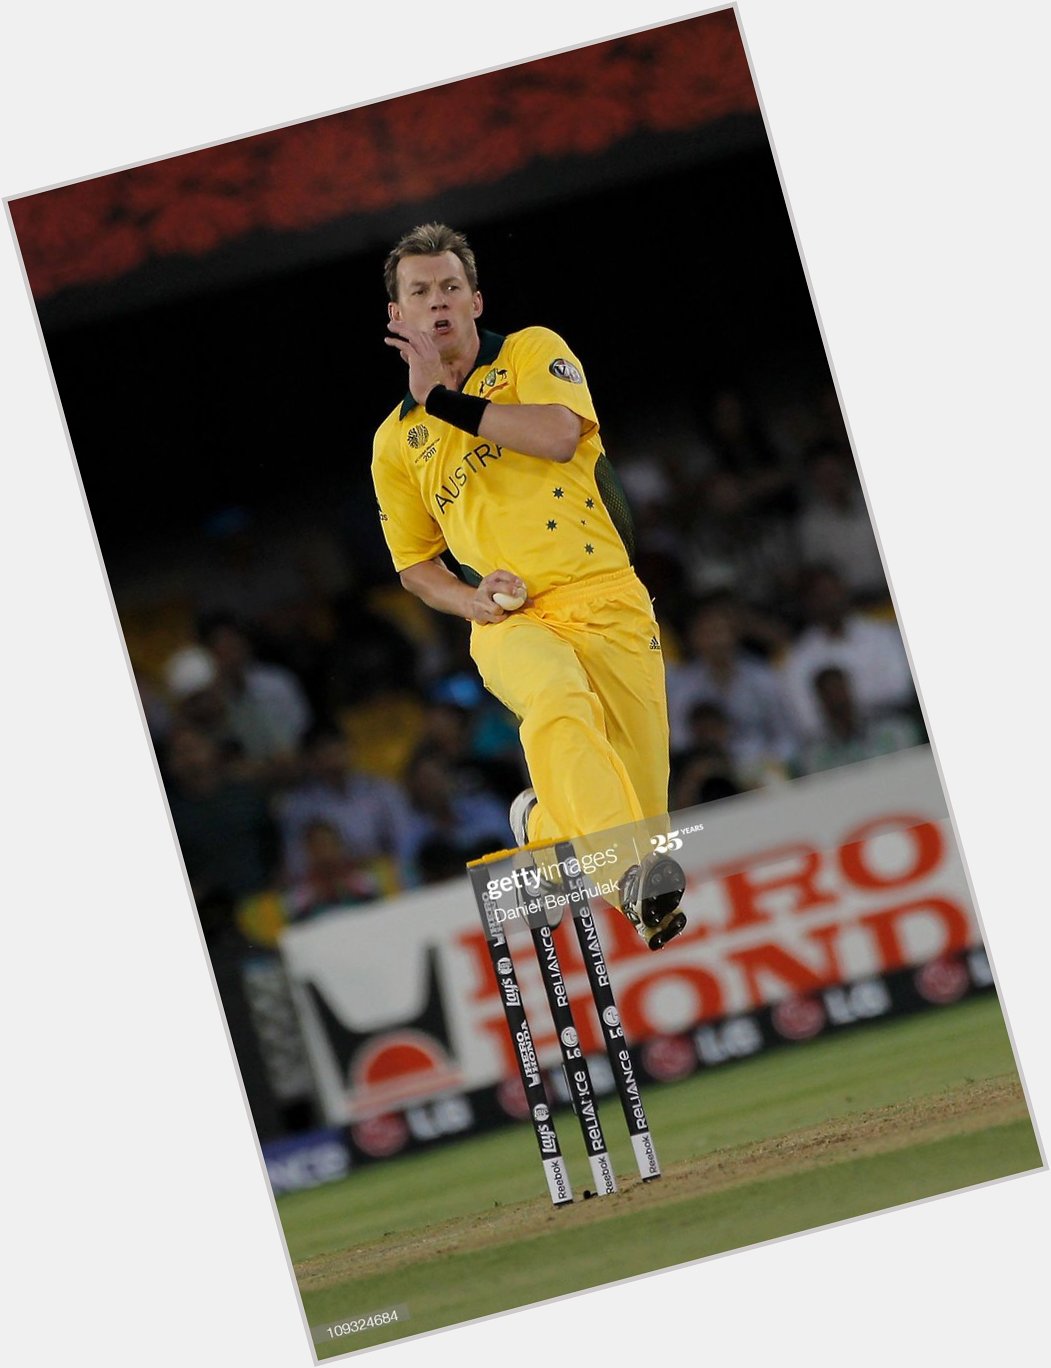 A big happy birthday to one of our finest ever fast bowlers, Brett Lee! 